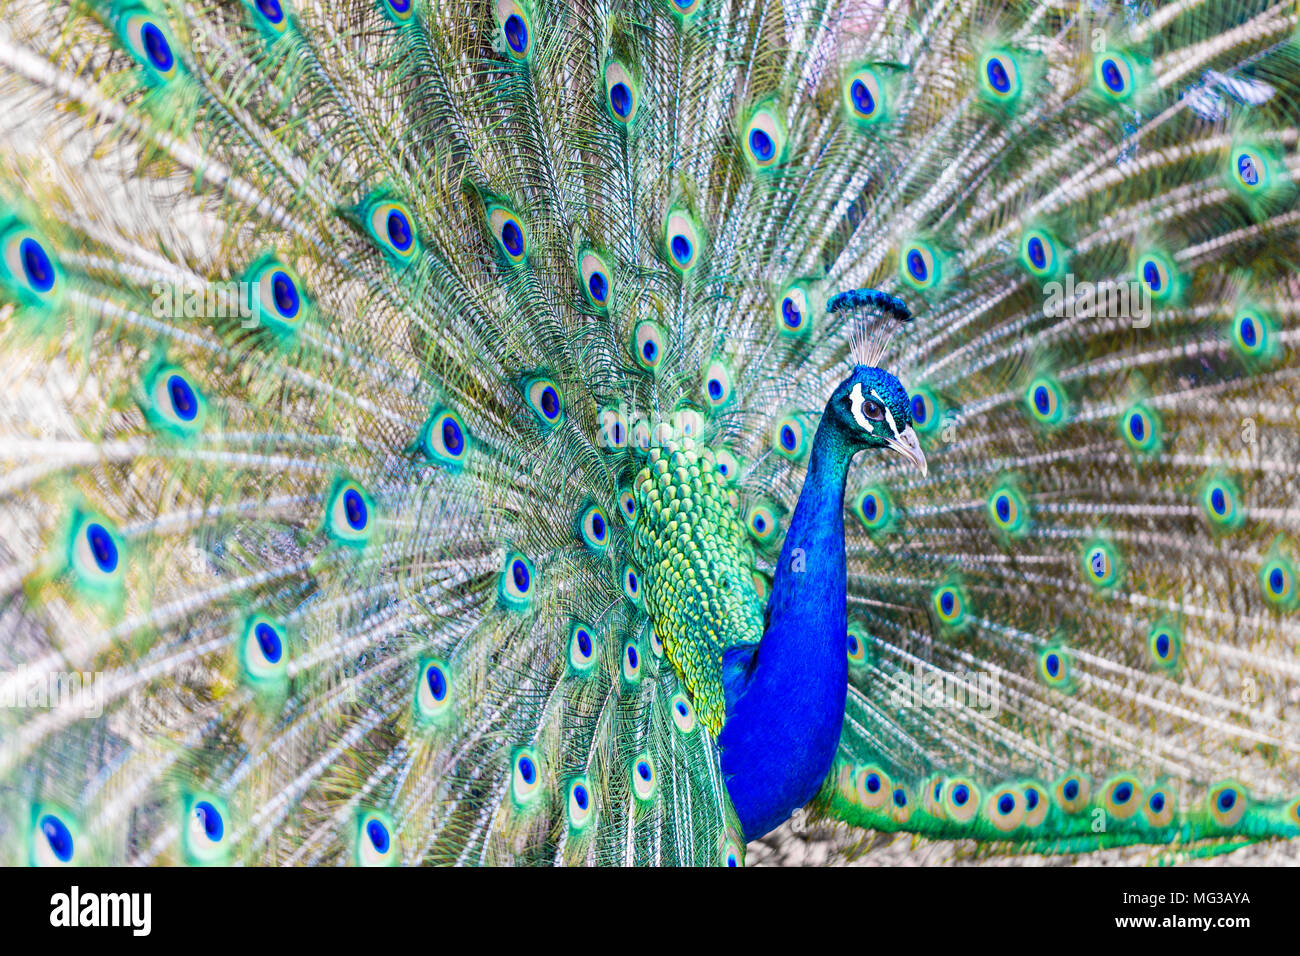 Male Peacock, showing full blue / green feather plumage Stock Photo